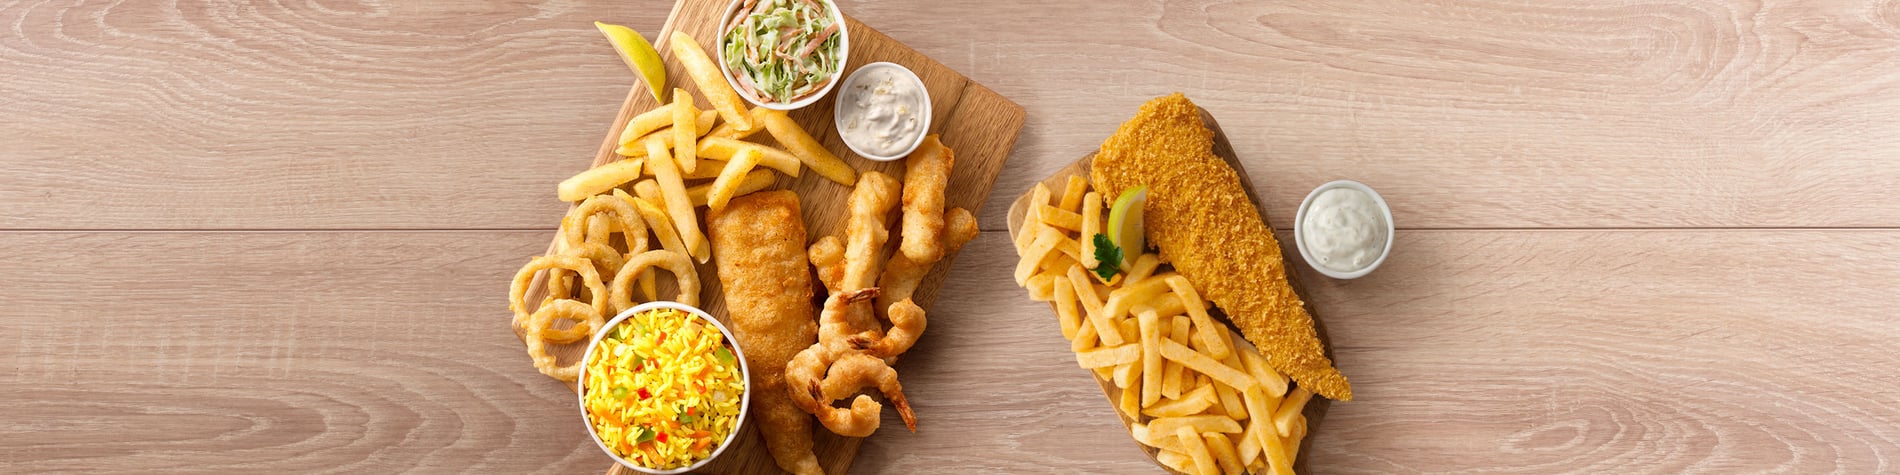 Seafood meals from Fishaways Oudtshoorn including a Crunchy Fish and Chips meal and a seafood Platter for One with hake, calamari, prawns, chips, onion rings, and coleslaw.